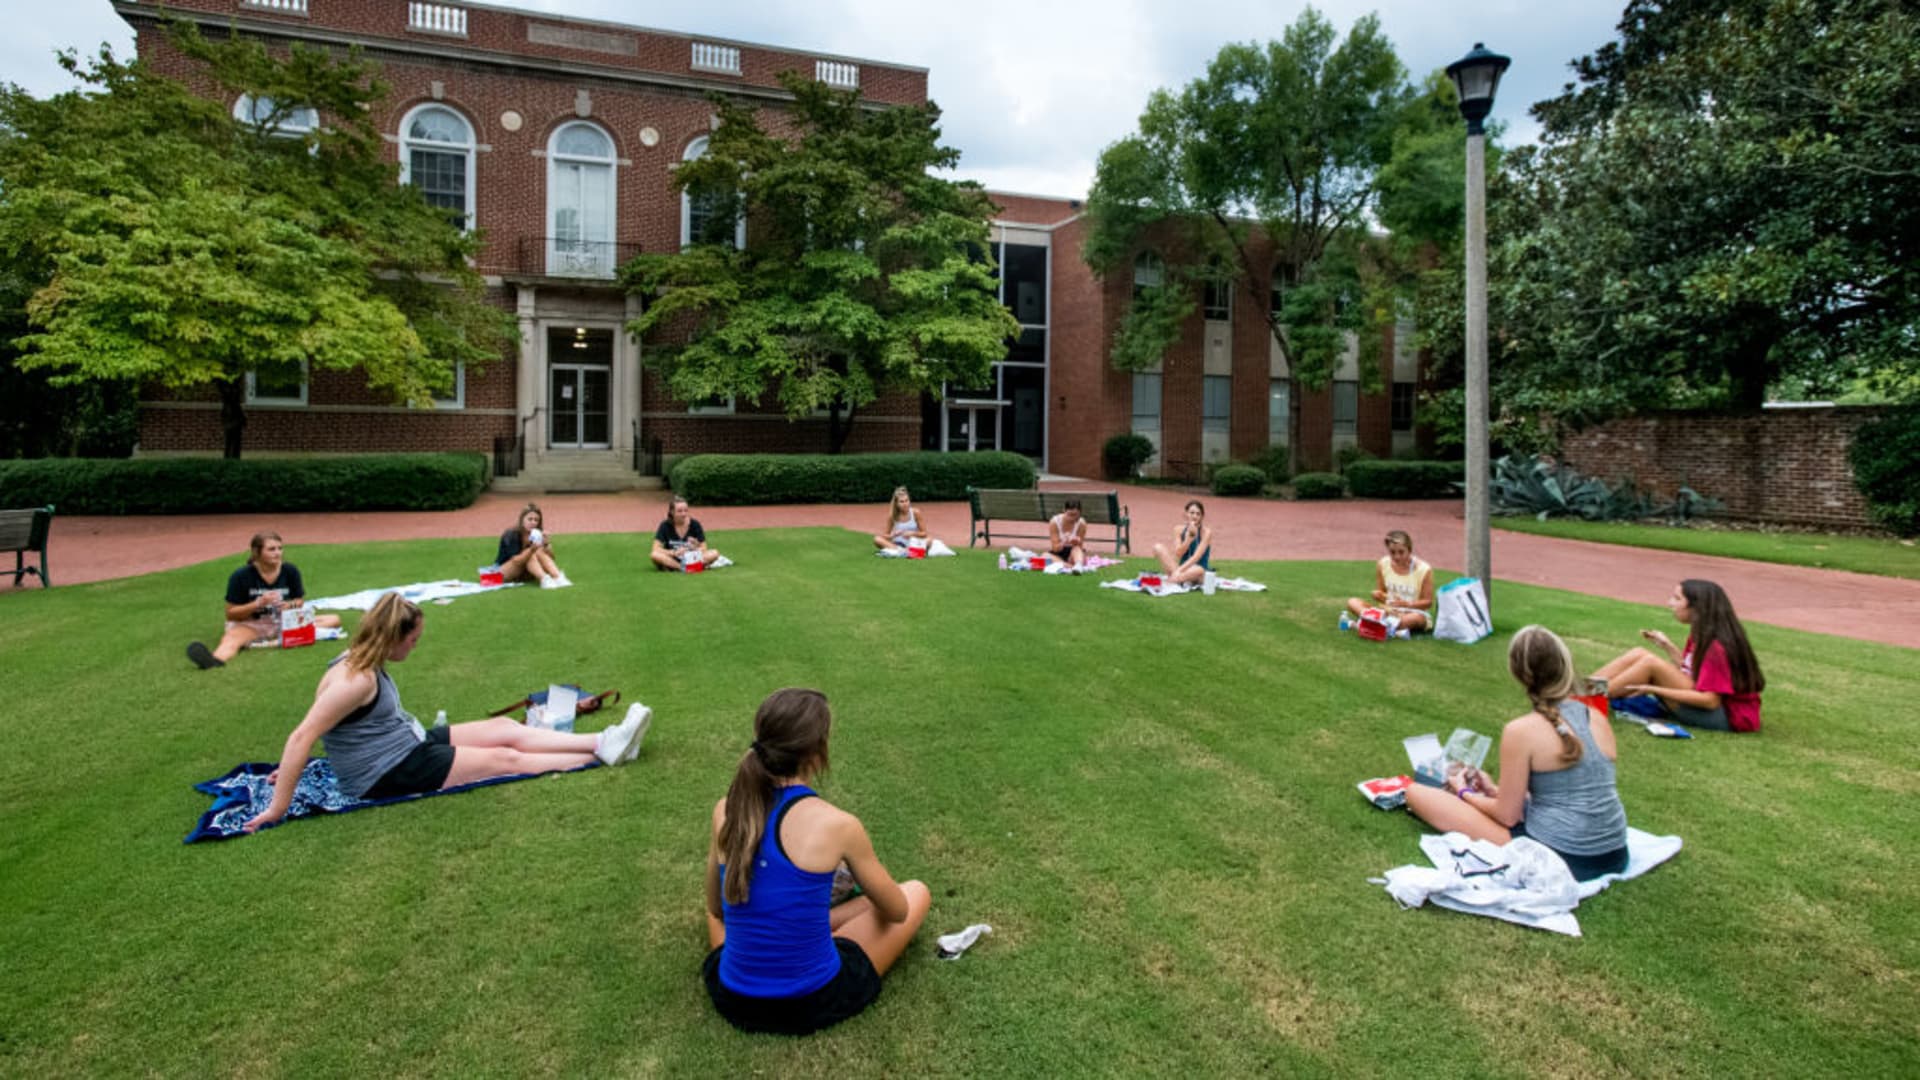 College students eat dinner outside at the University of South Carolina on August 10, 2020 in Columbia, South Carolina. Students began moving back to campus housing August 9 with classes to start August 20.